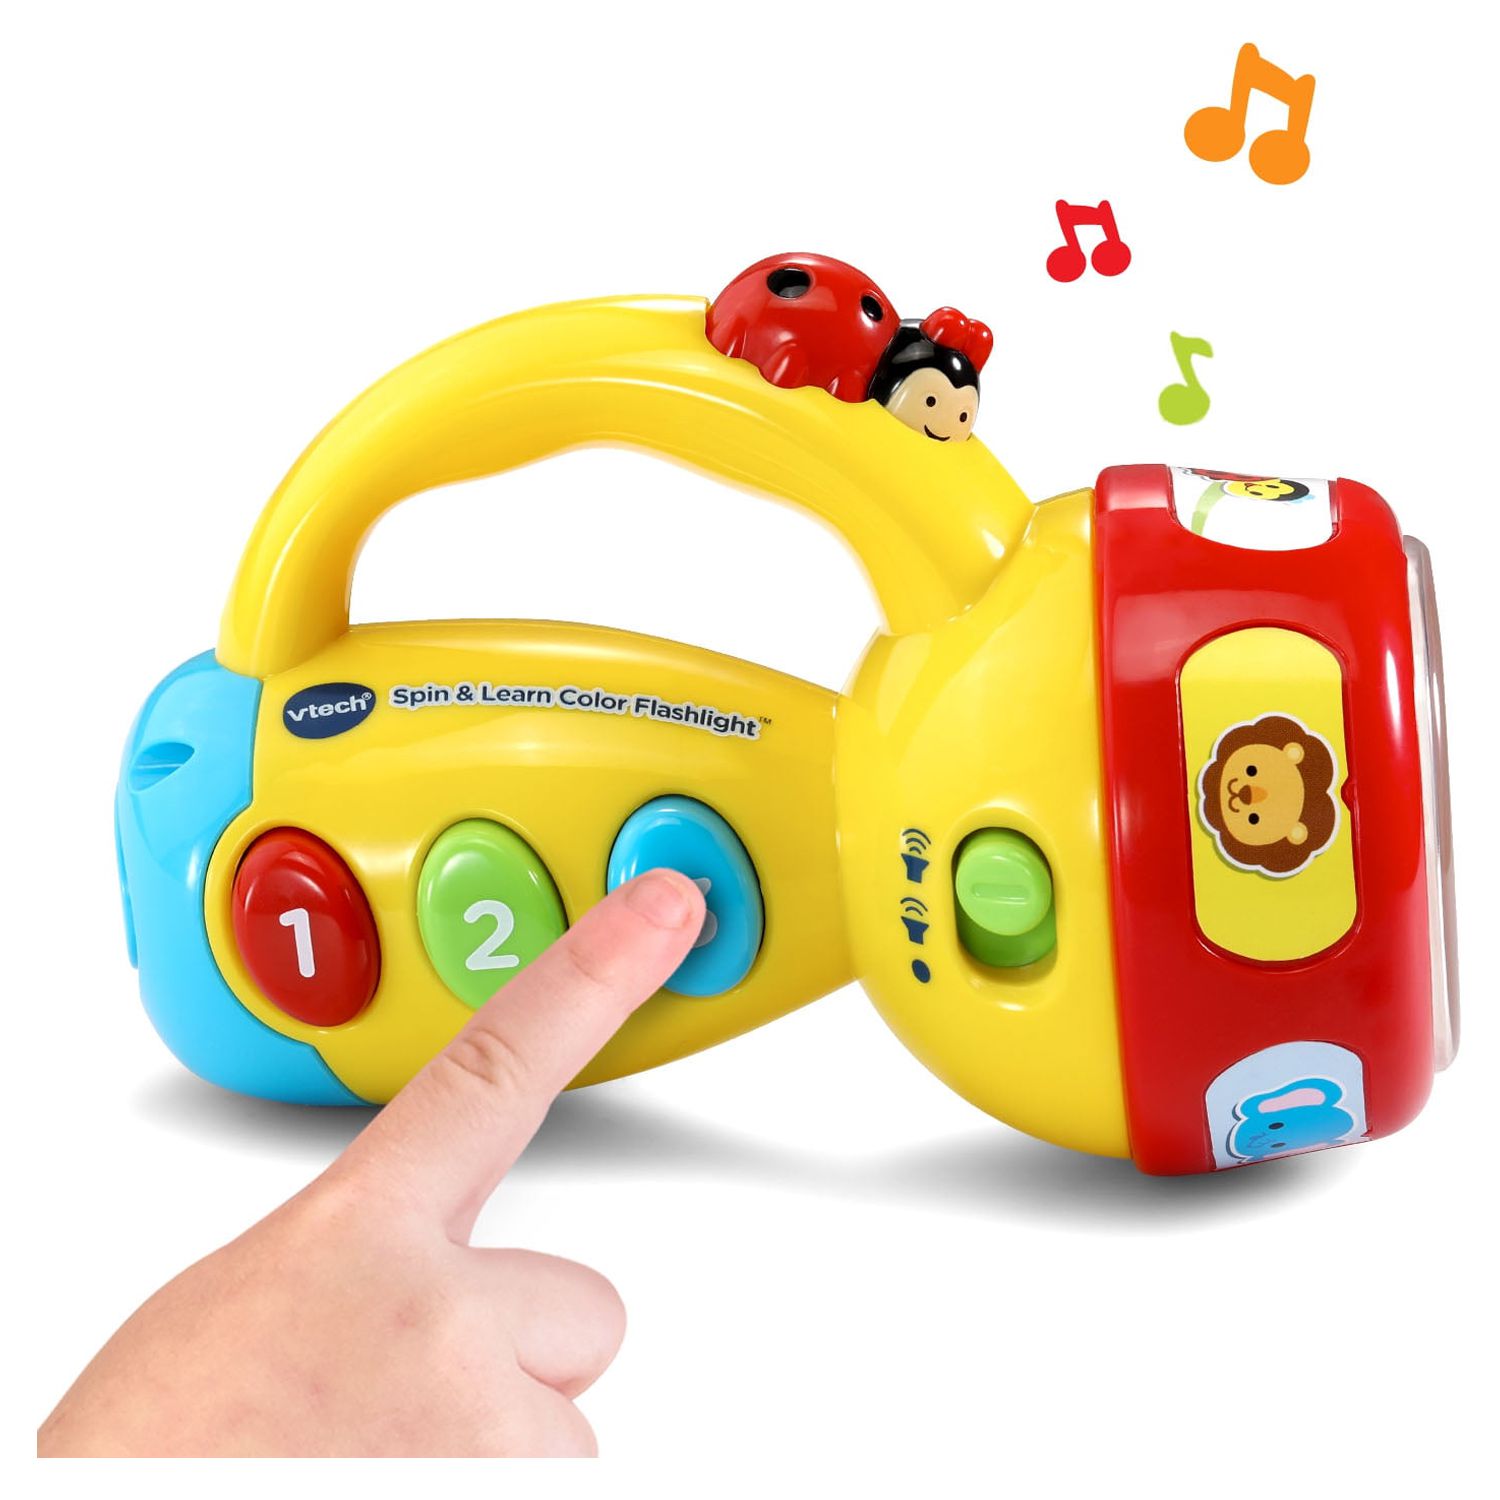 VTech, Spin and Learn Color Flashlight, Toddler Learning Toy - image 5 of 8